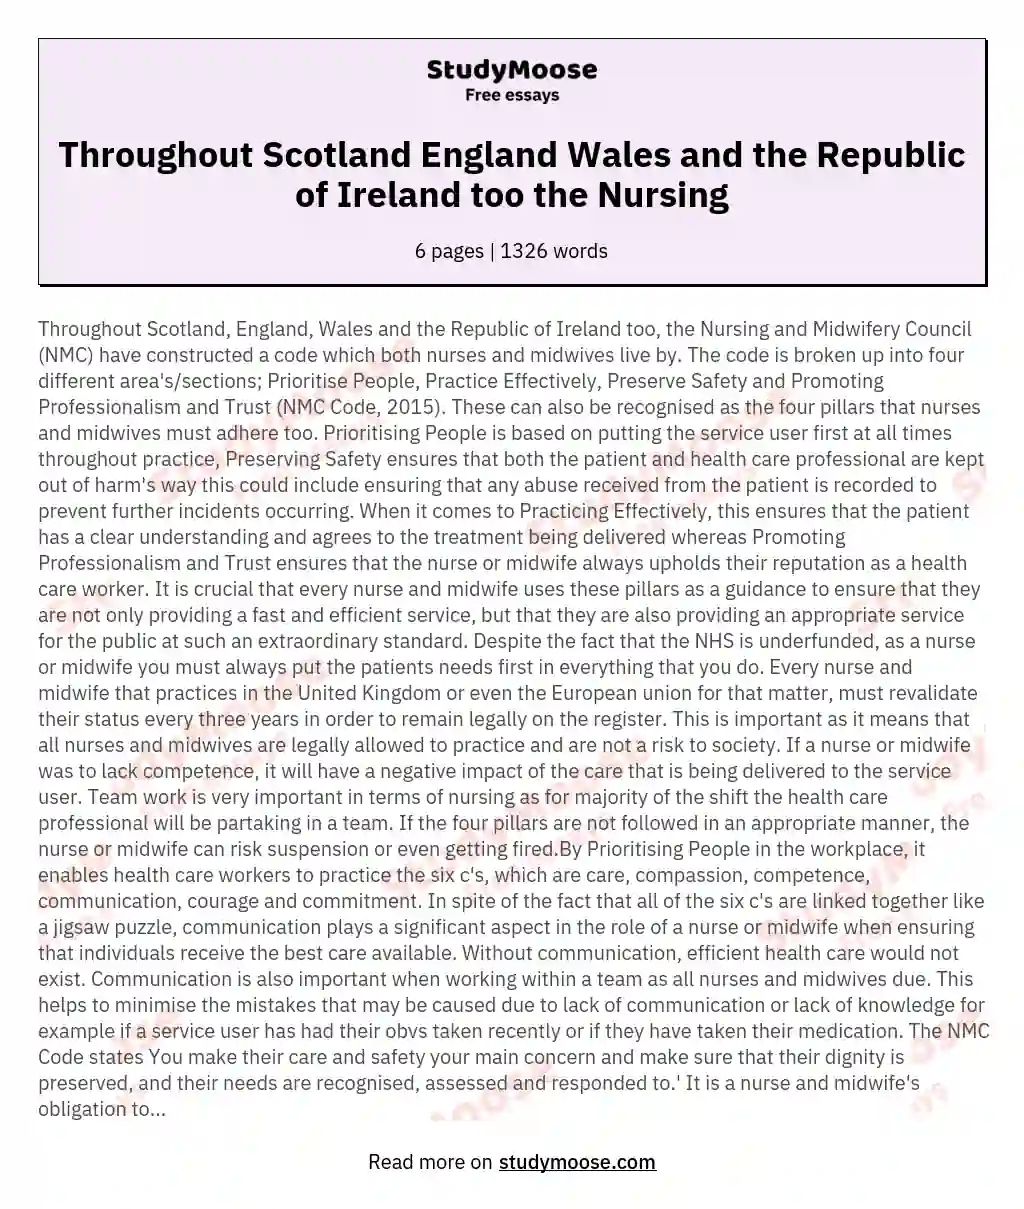 Throughout Scotland England Wales and the Republic of Ireland too the Nursing essay